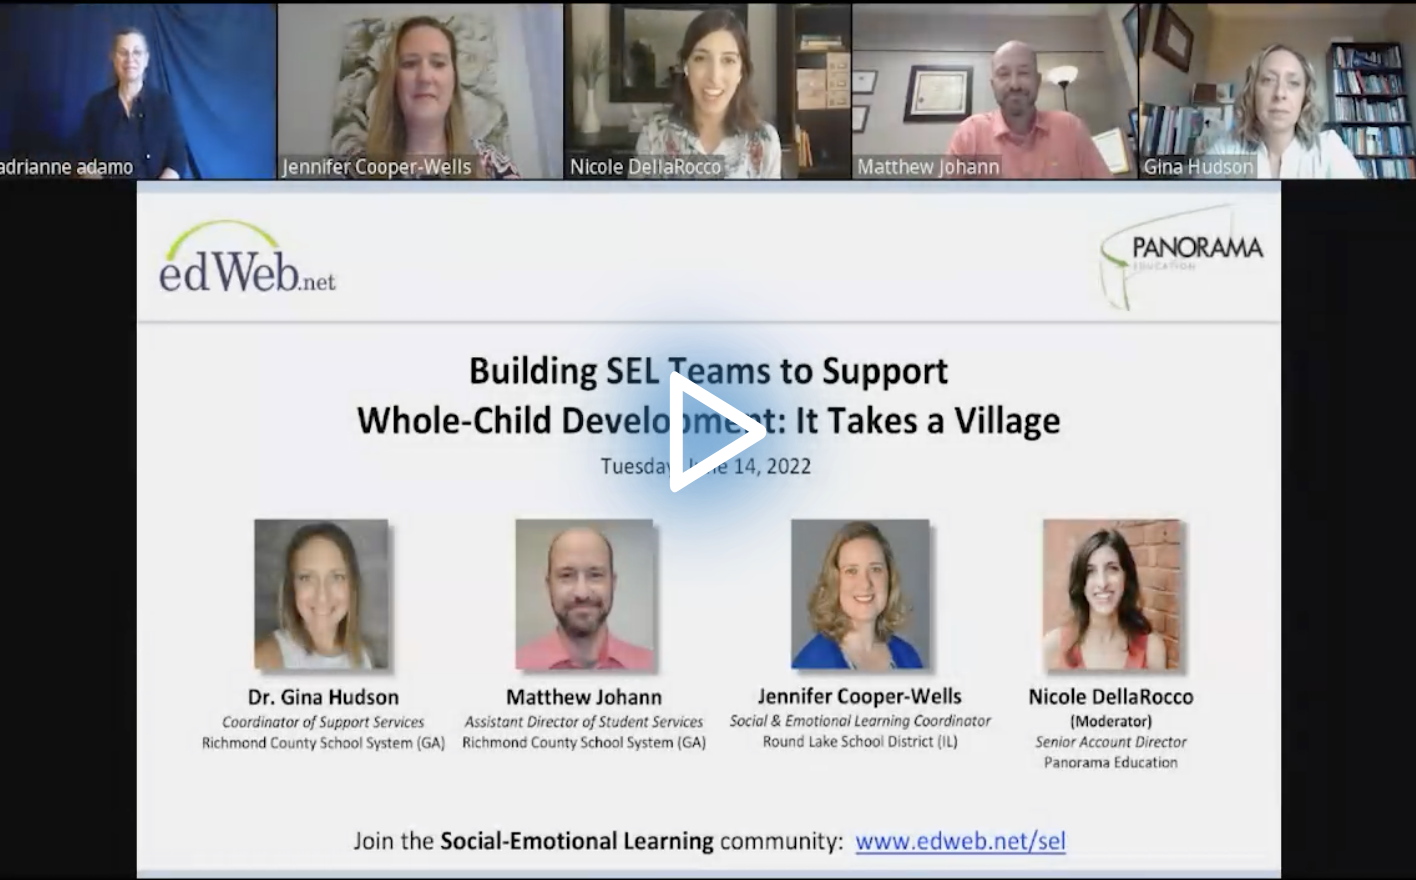 Building SEL Teams to Support Whole-Child Development: It Takes a Village edLeader Panel recording link